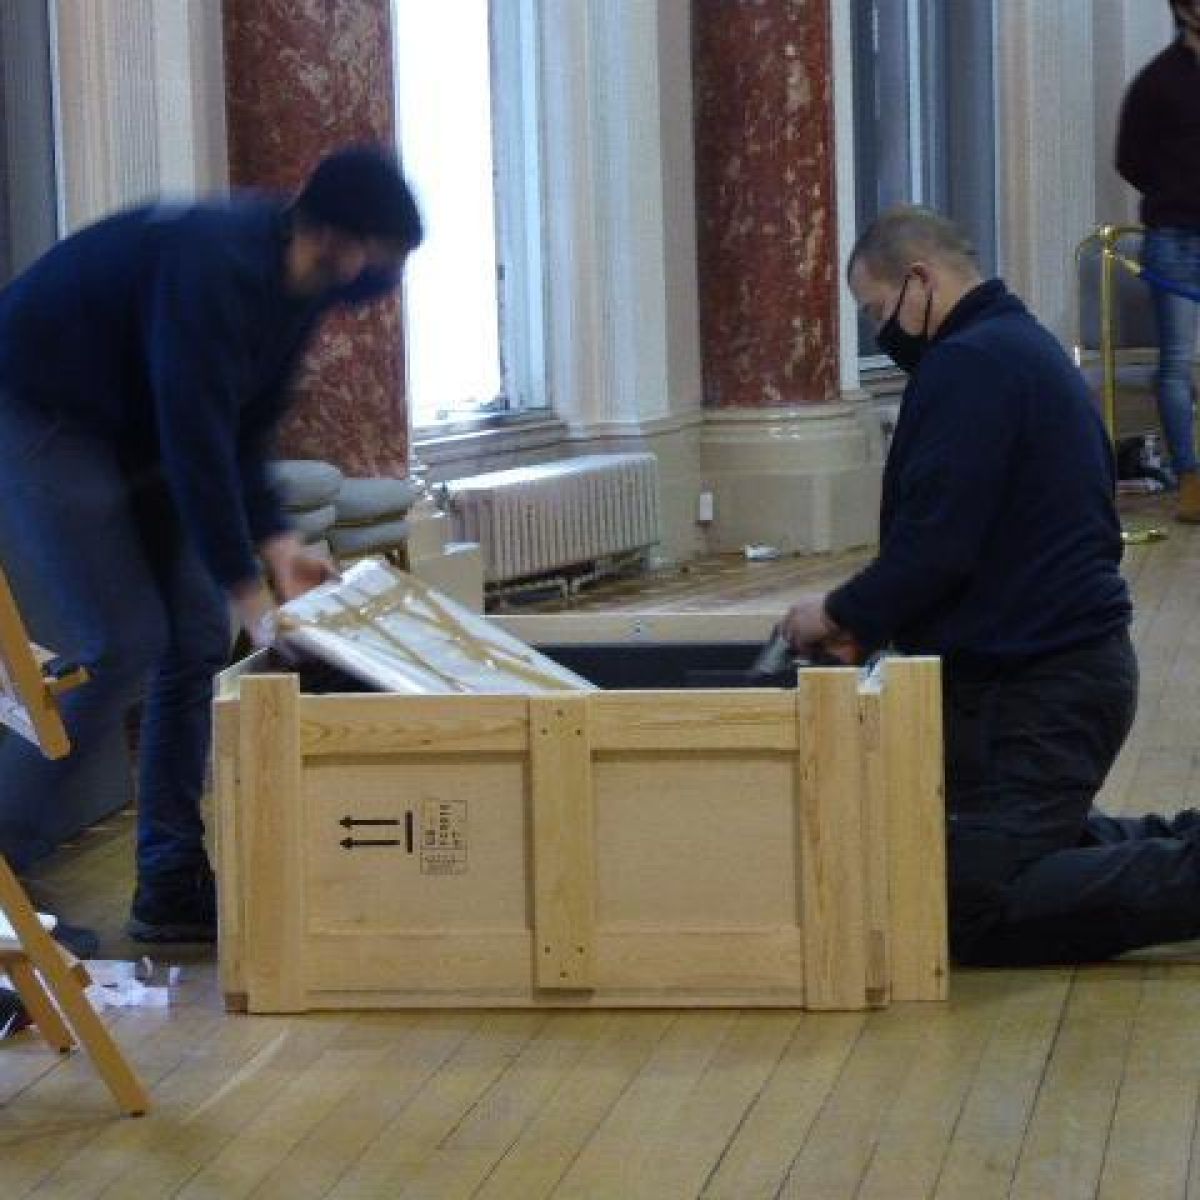 Paintings Are Carefully Placed In The Crates